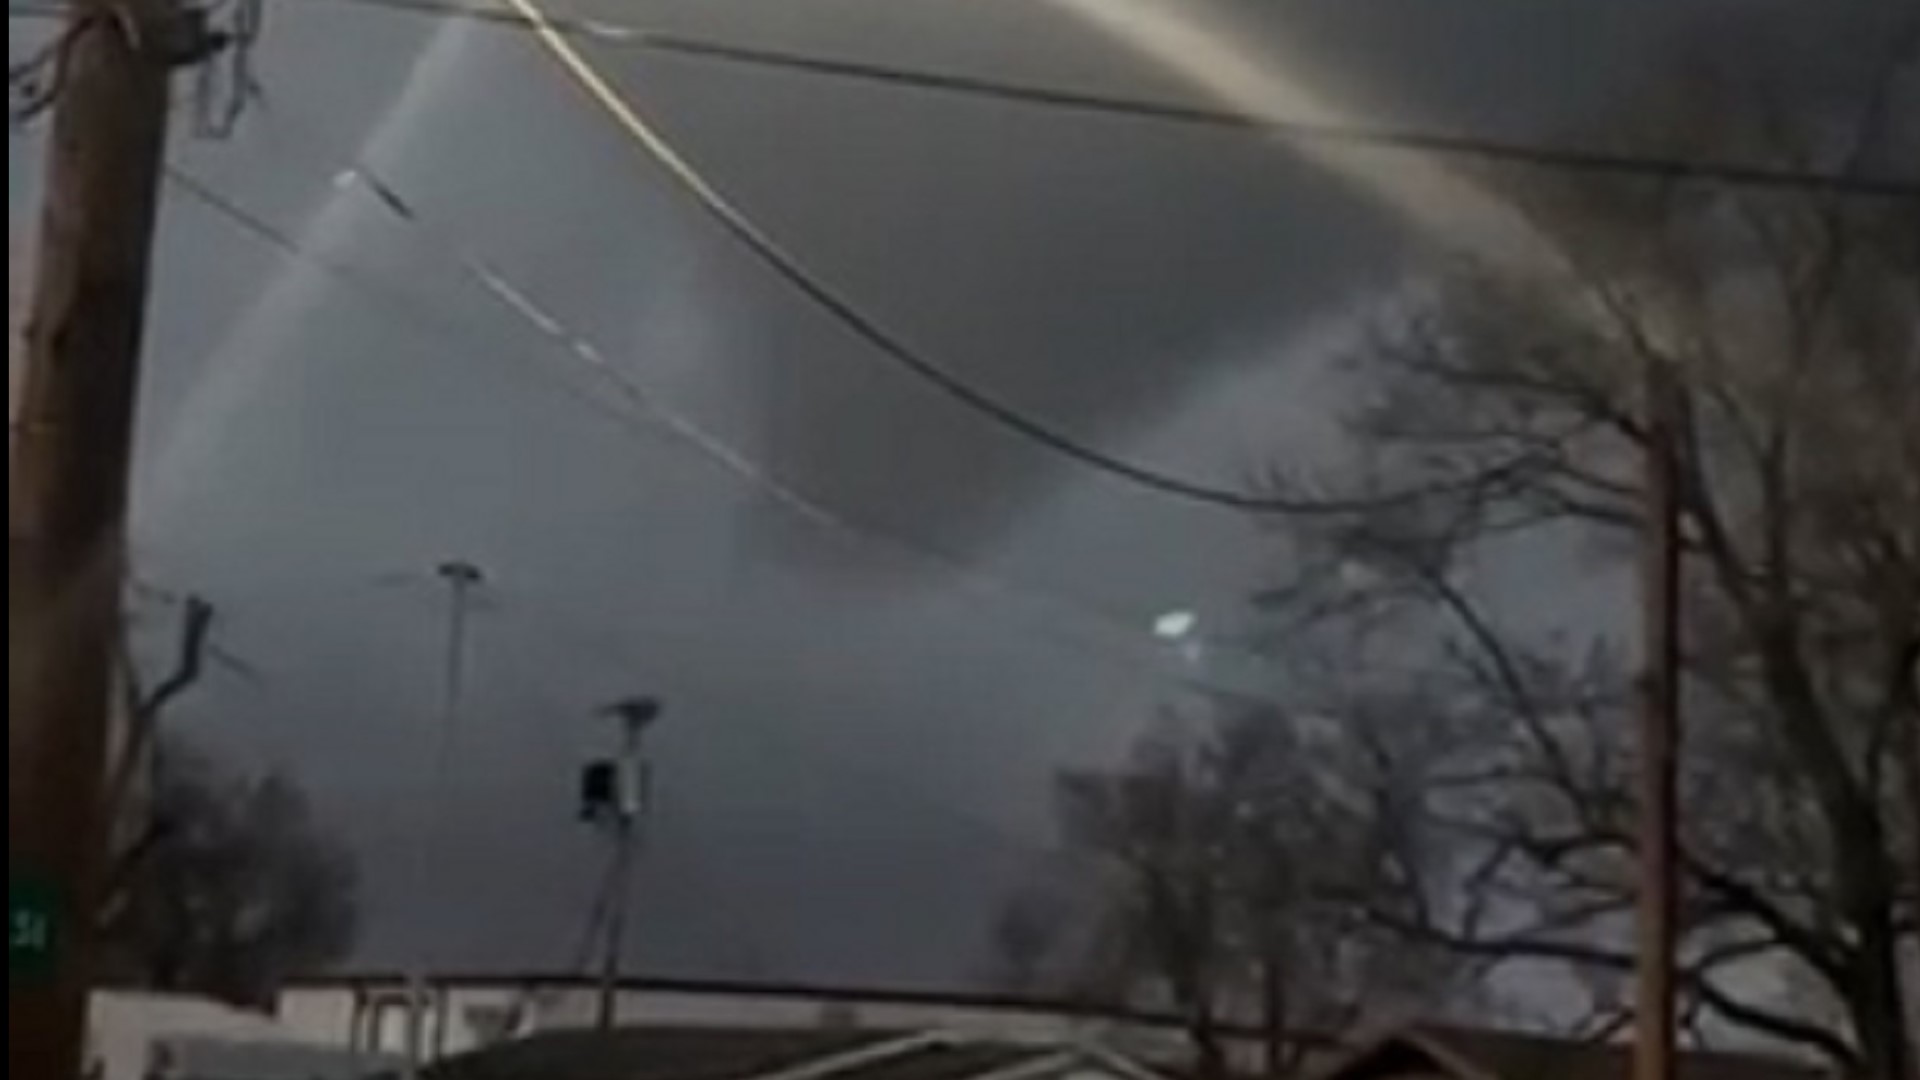 Trinity Moore captured video of a suspected tornado in Selma, Indiana.